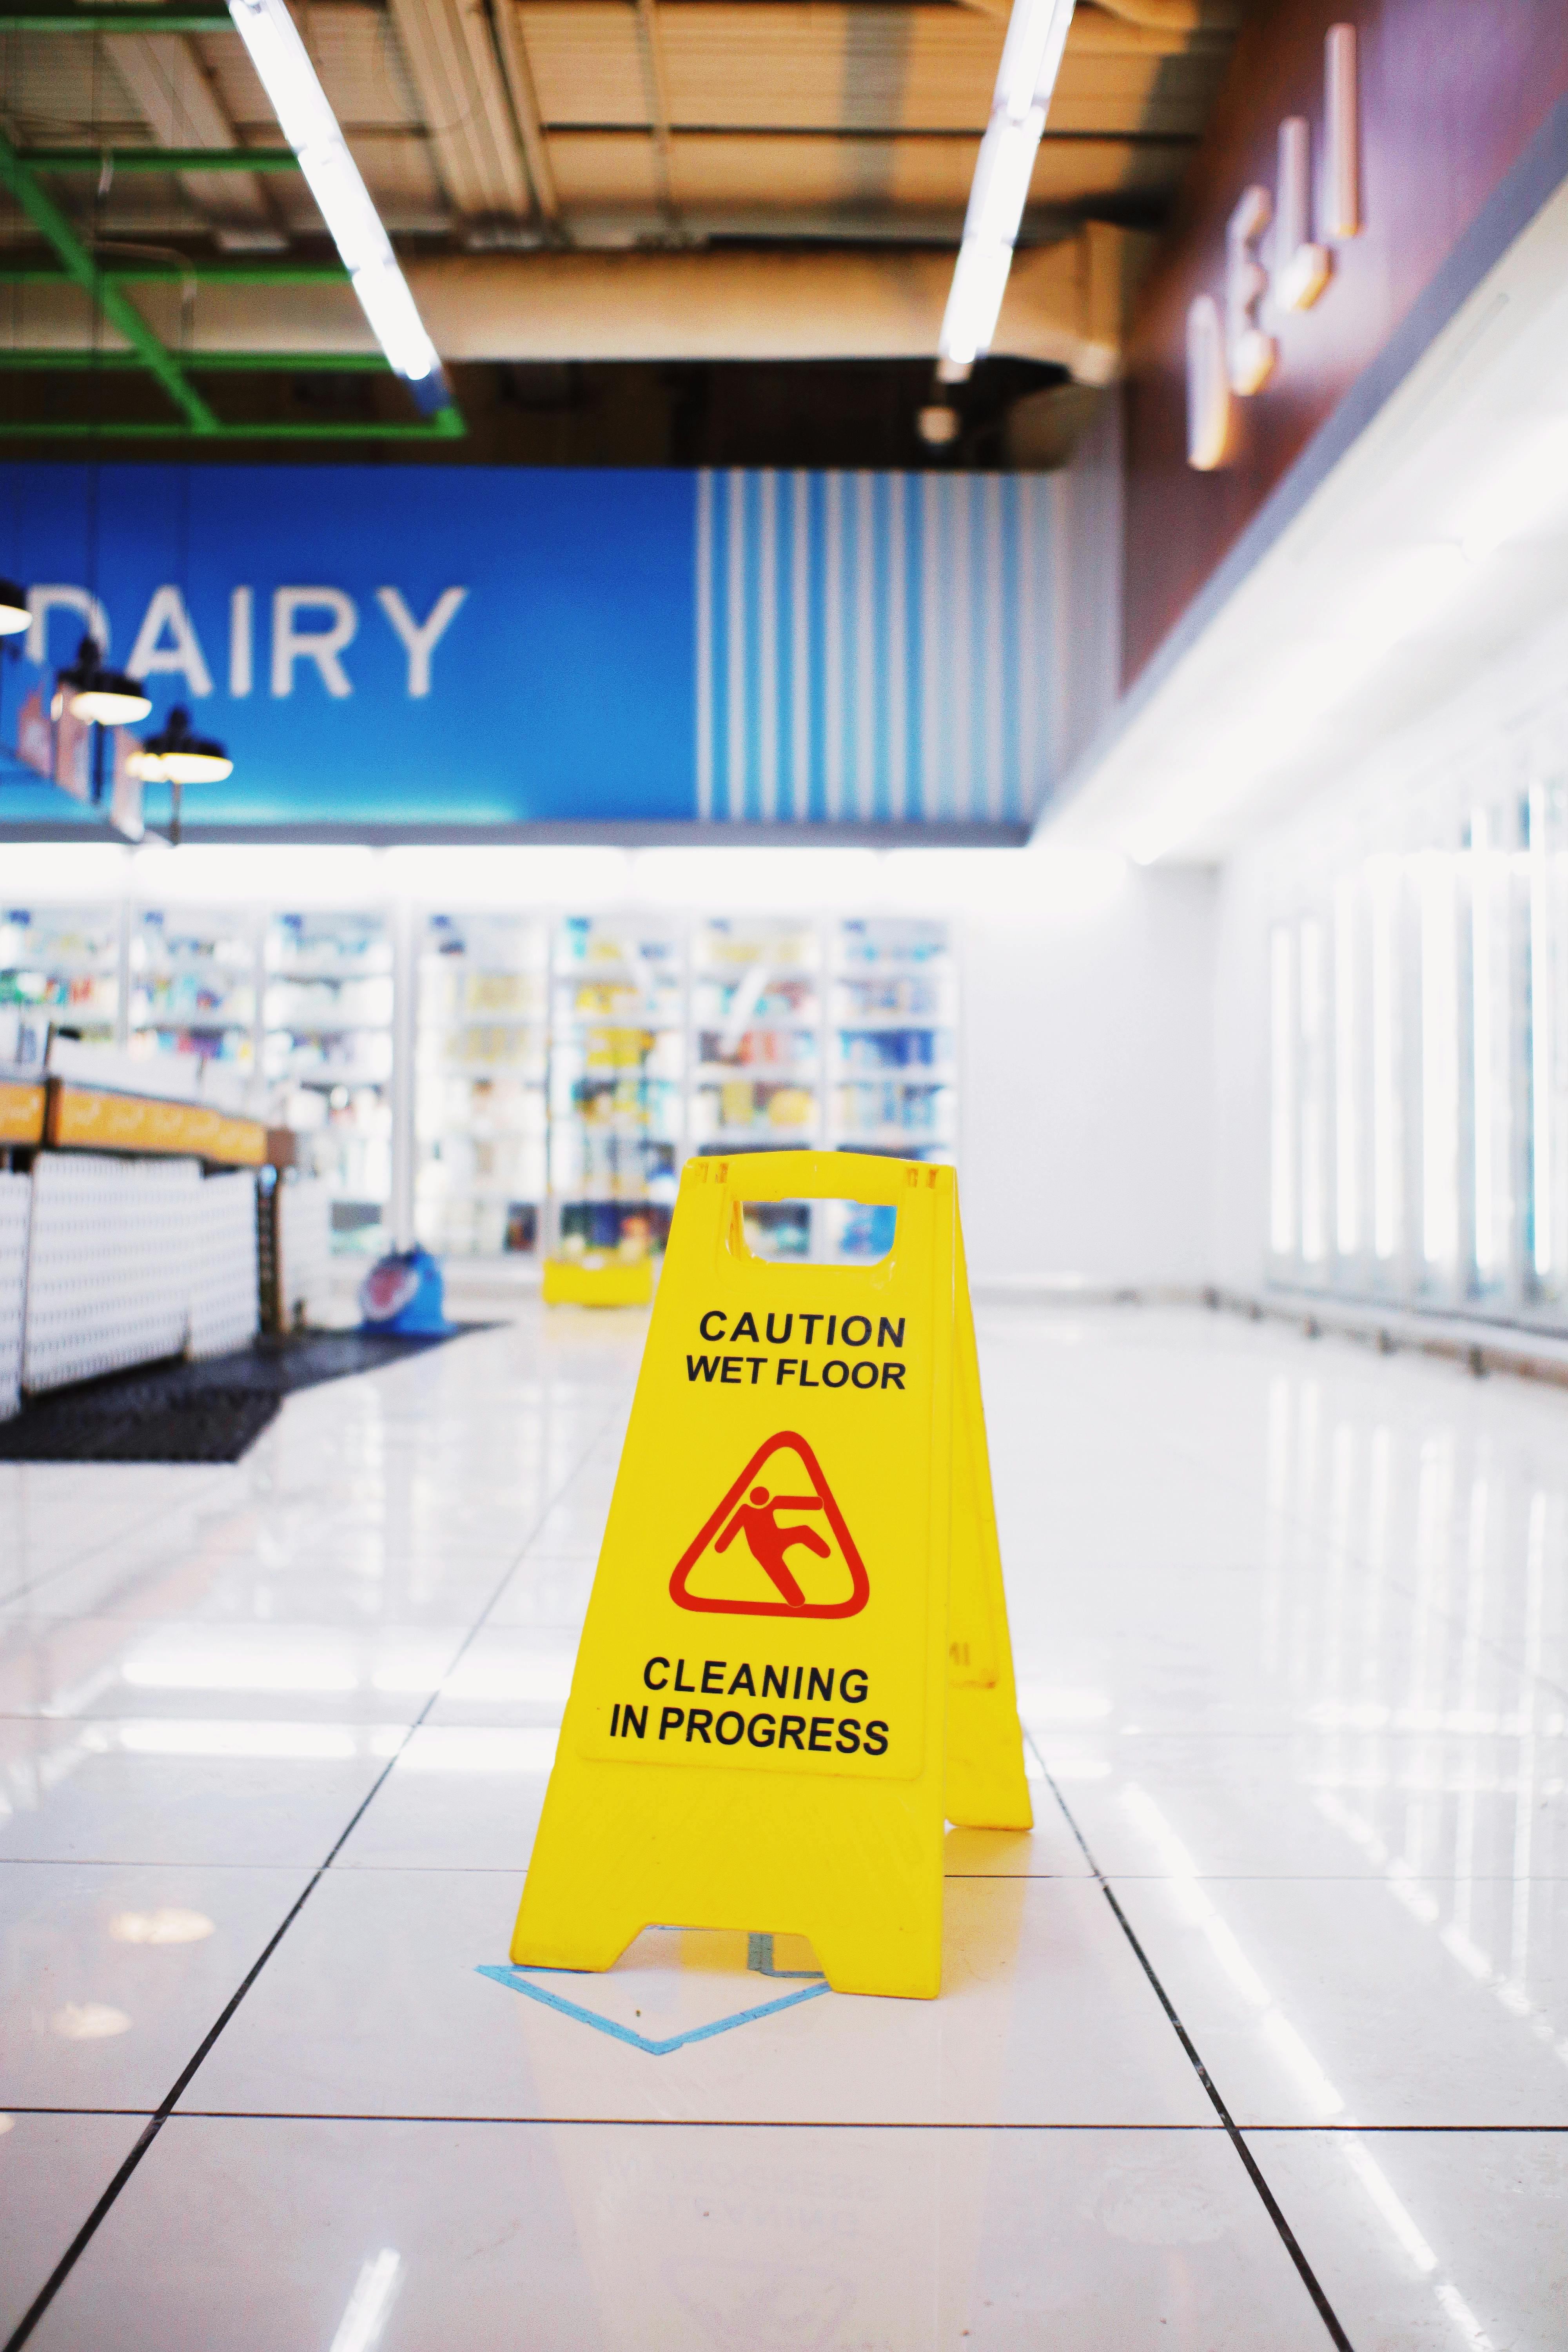 "Caution wet floor" sign in a grocery store | Source: Pexels